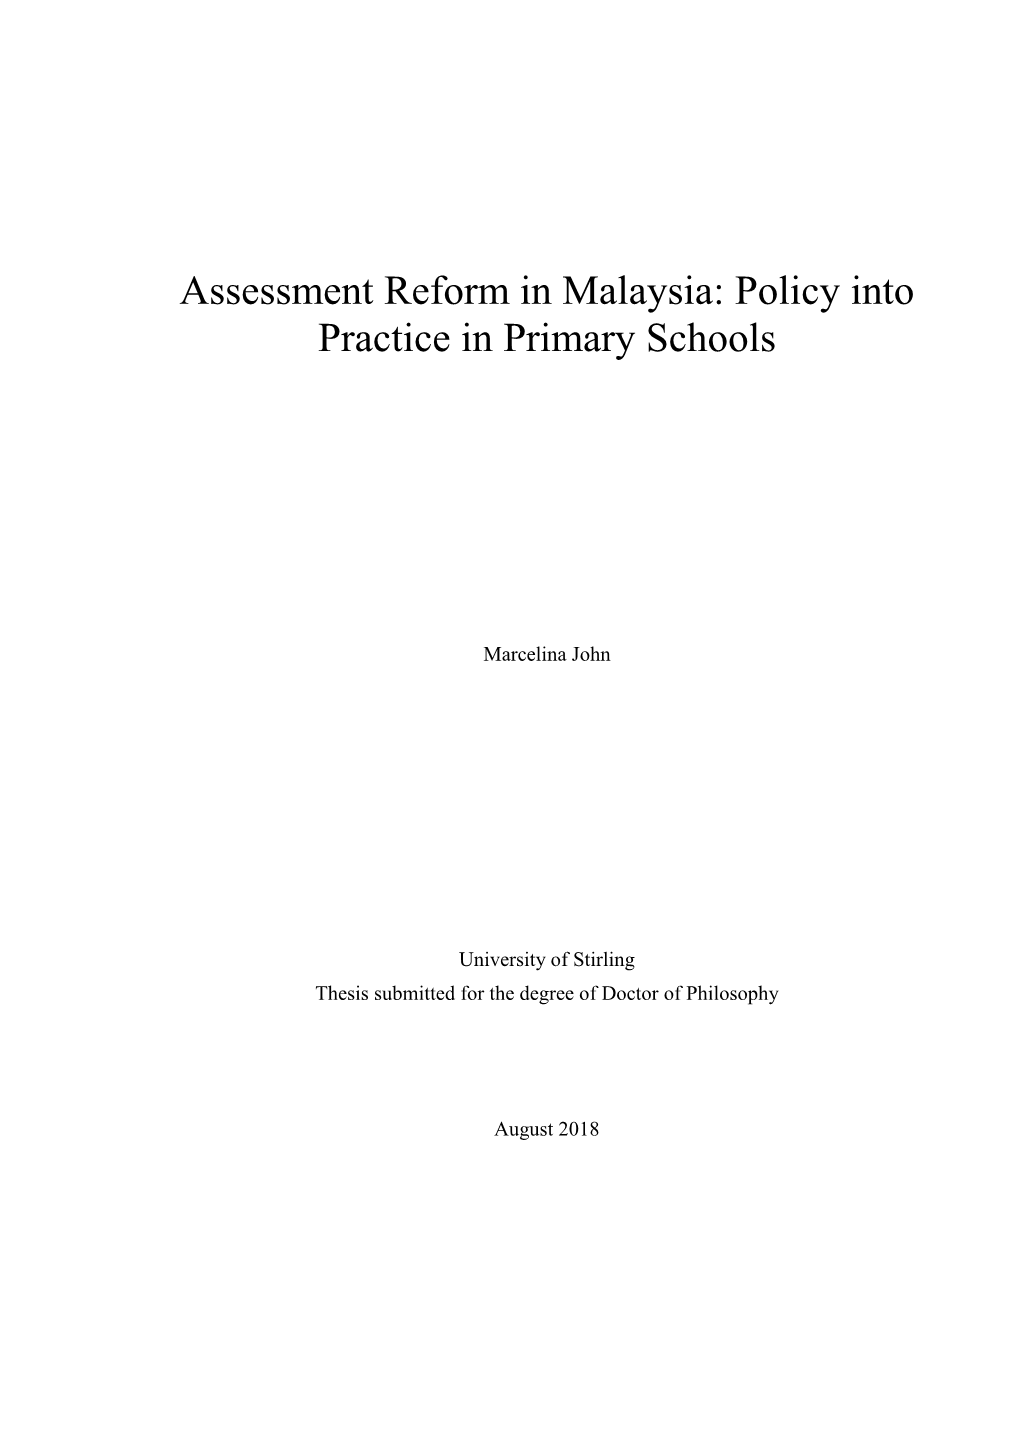 Assessment Reform in Malaysia: Policy Into Practice in Primary Schools